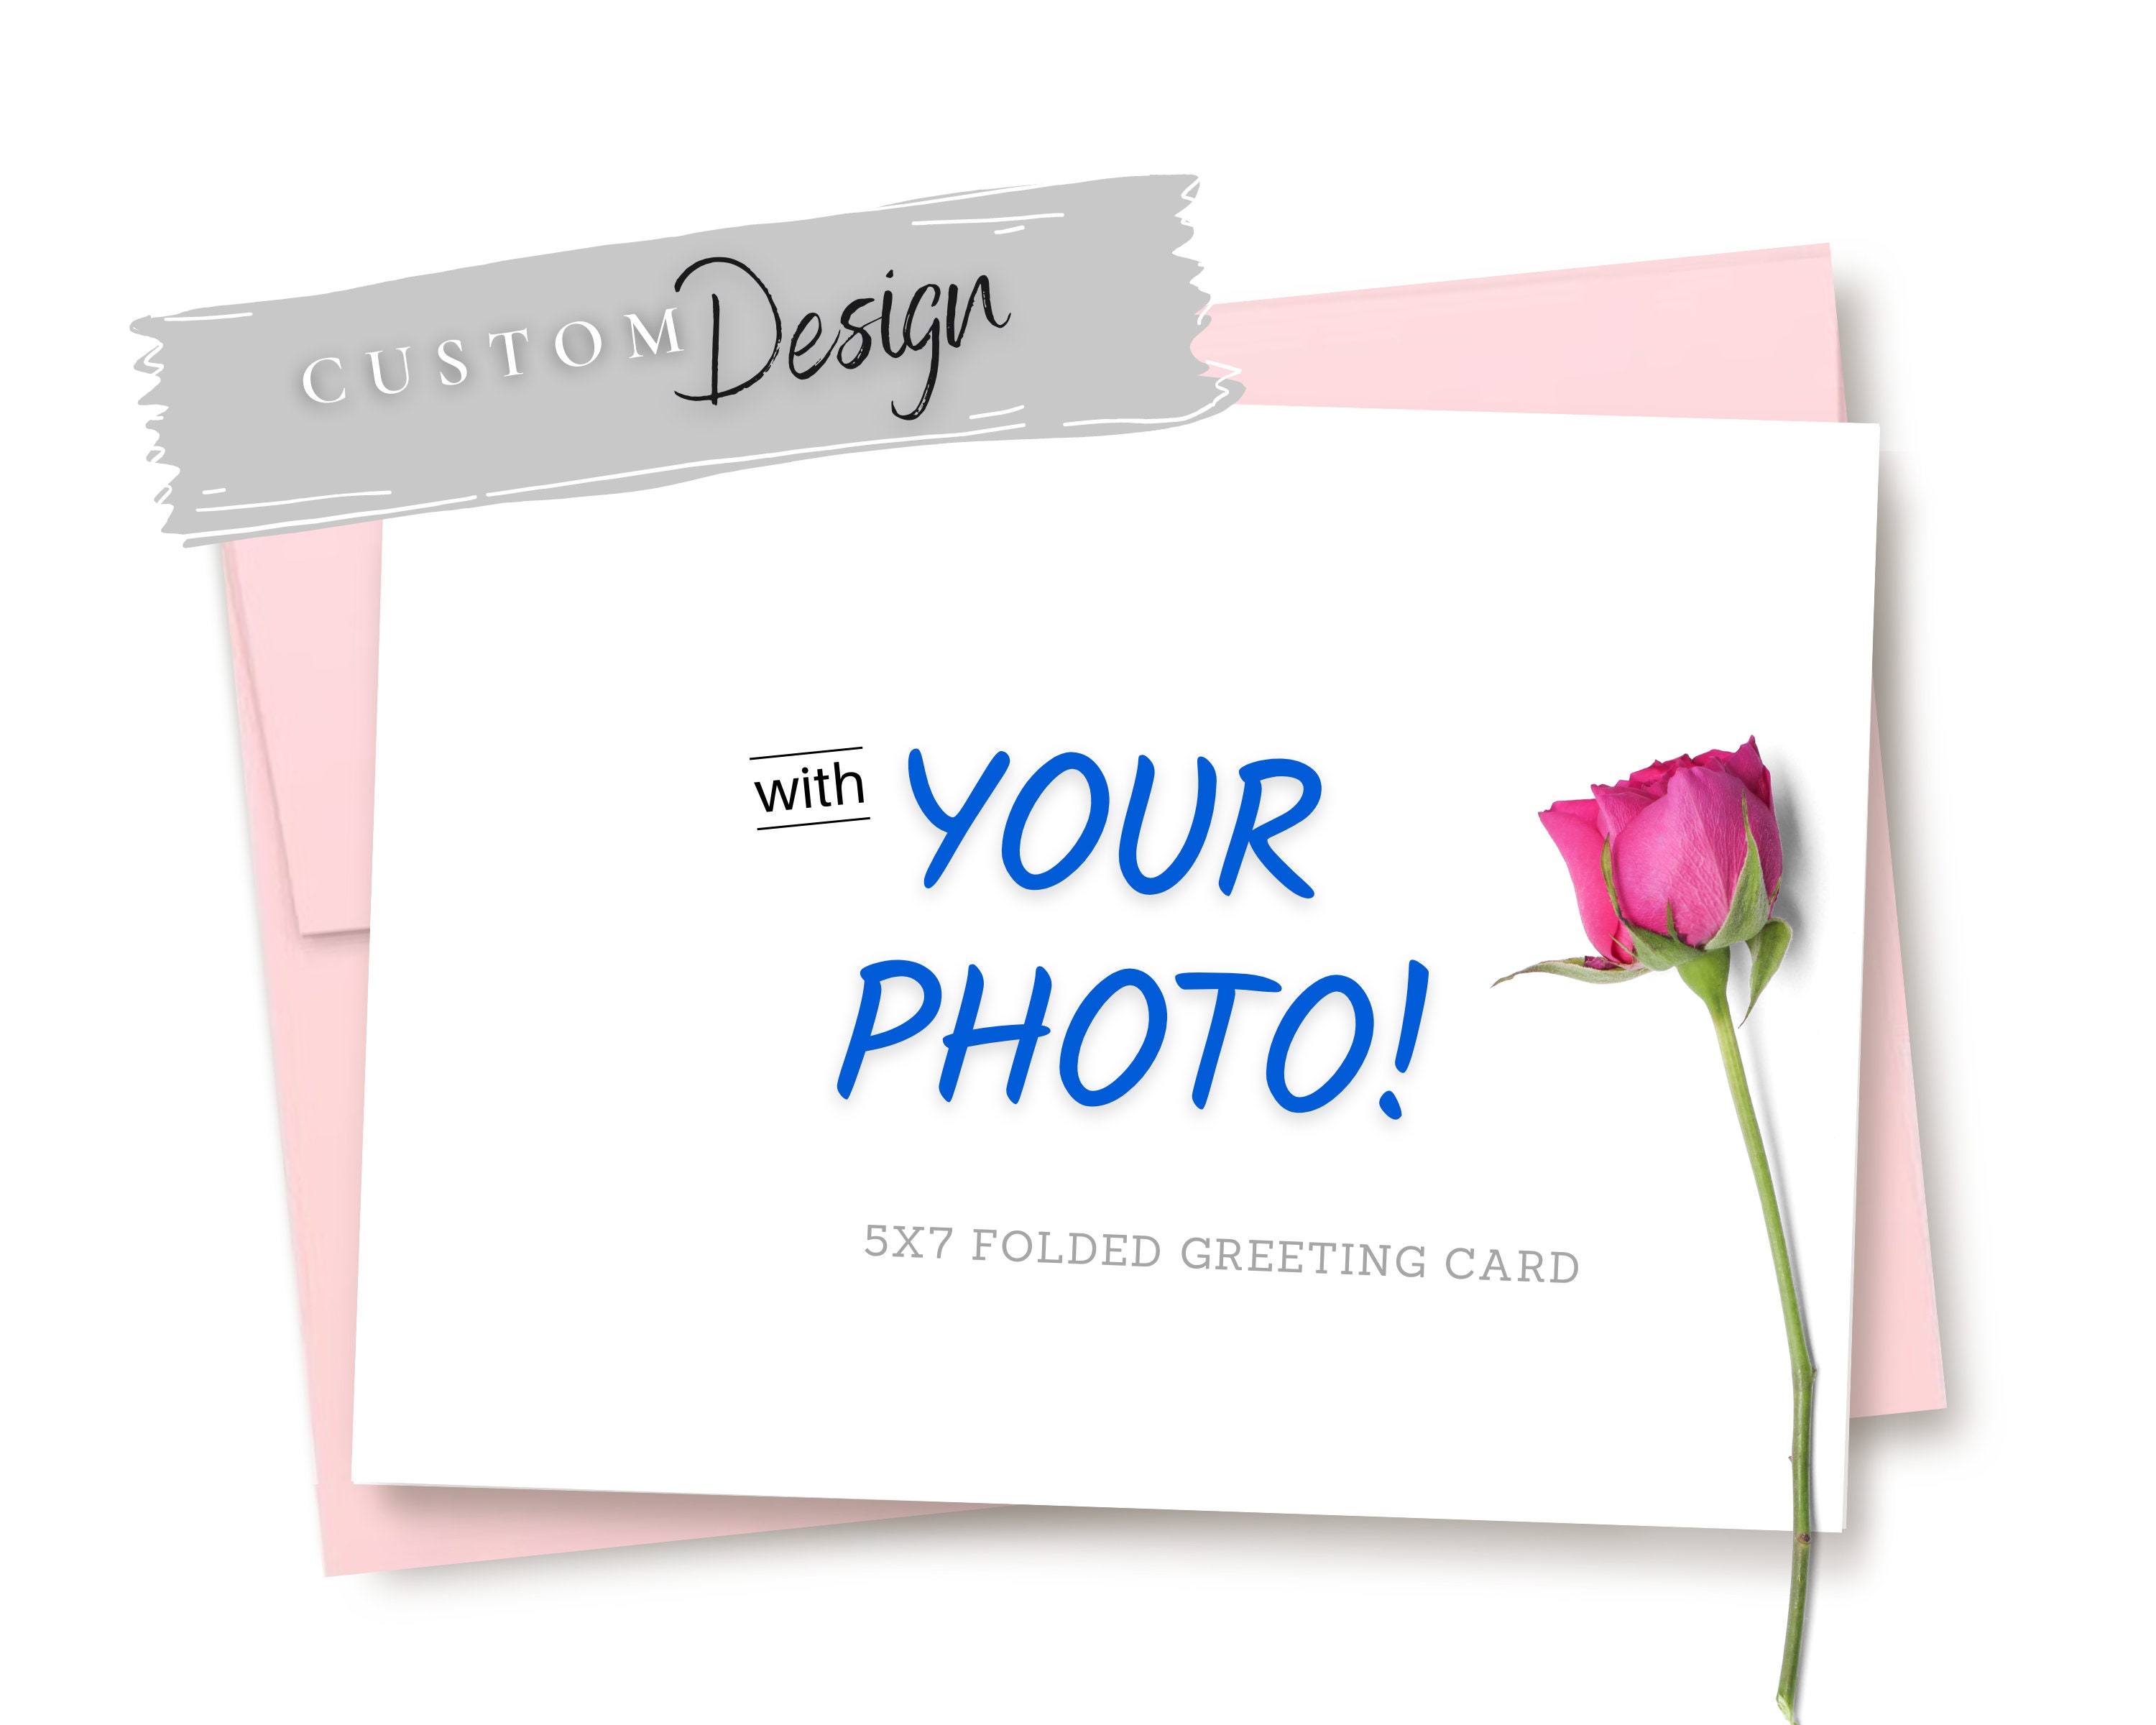 PROOF - Print Your Own Design 5x7 Folded Card